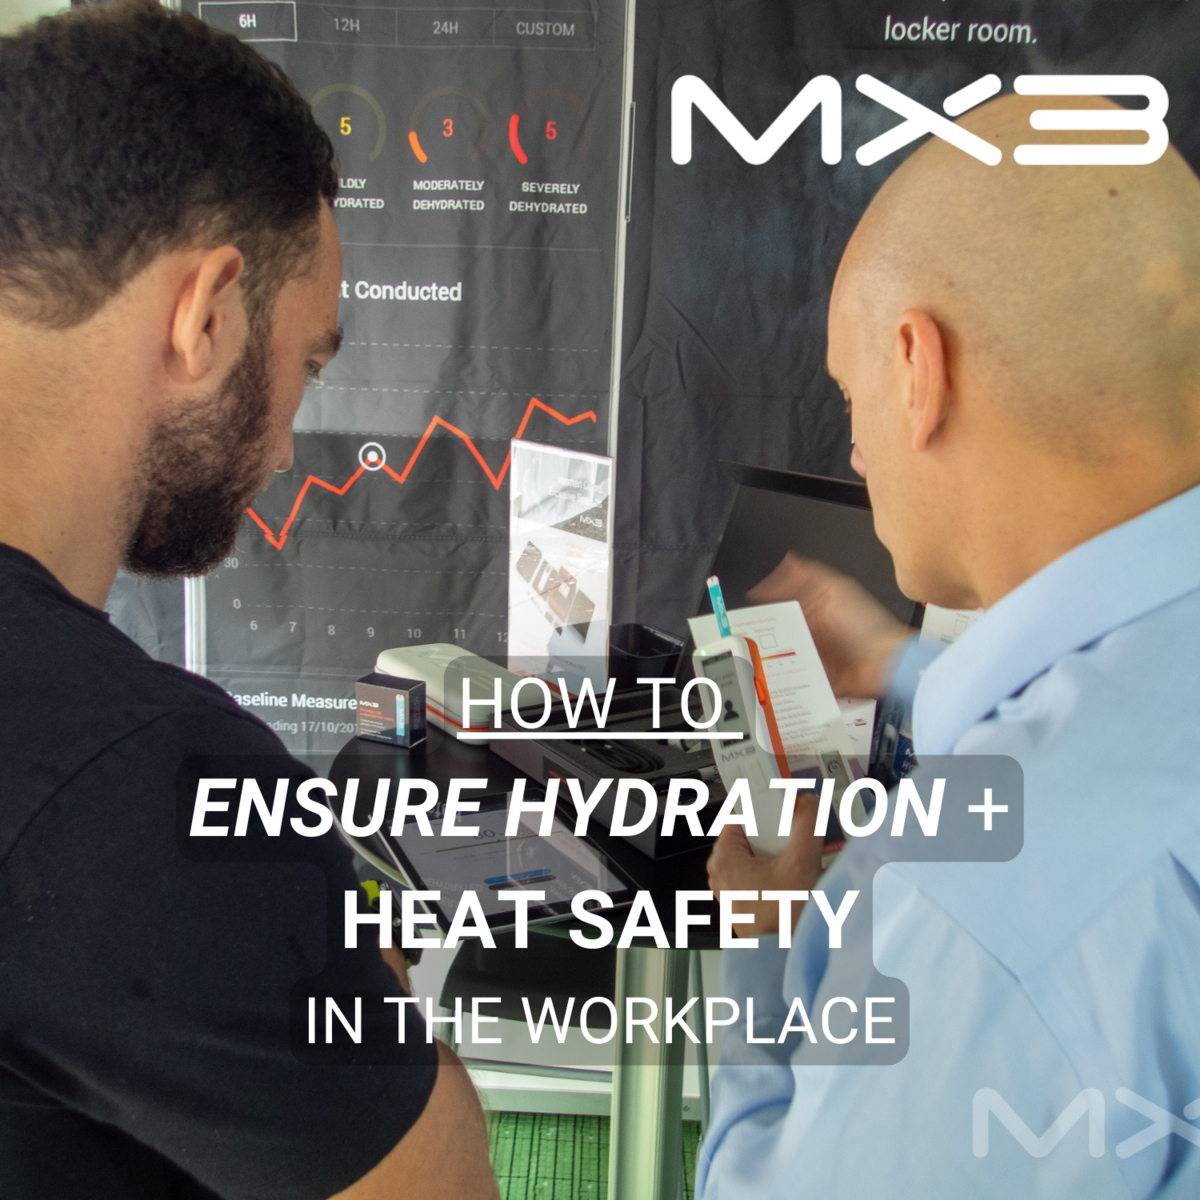 How to Ensure Employee Hydration and Heat Safety in the Workplace